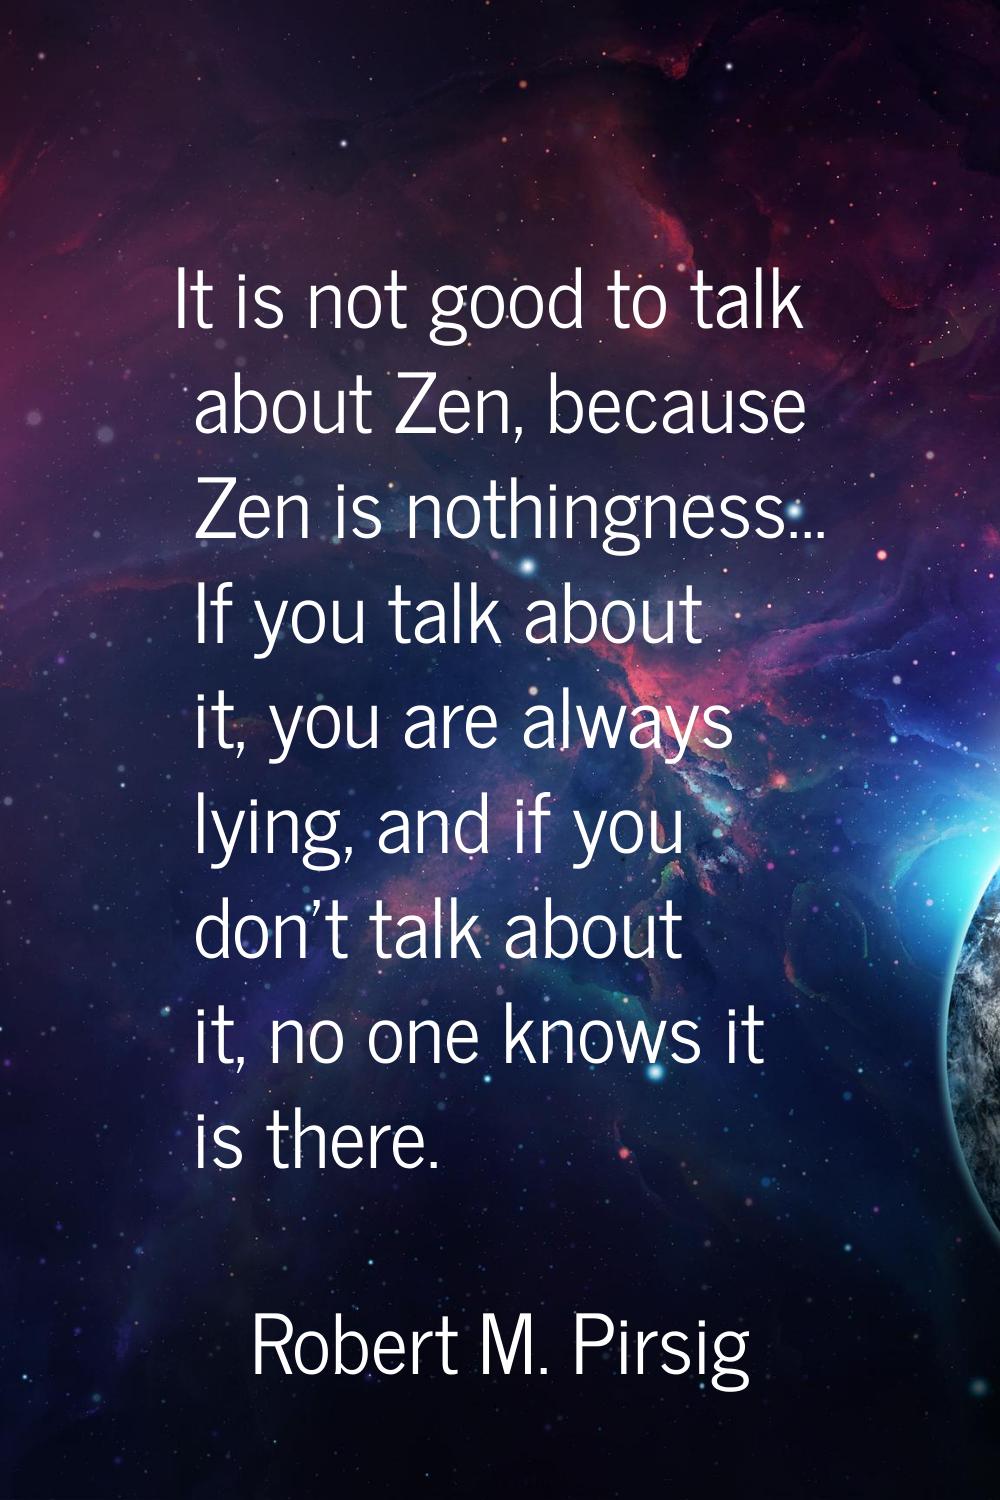 It is not good to talk about Zen, because Zen is nothingness... If you talk about it, you are alway